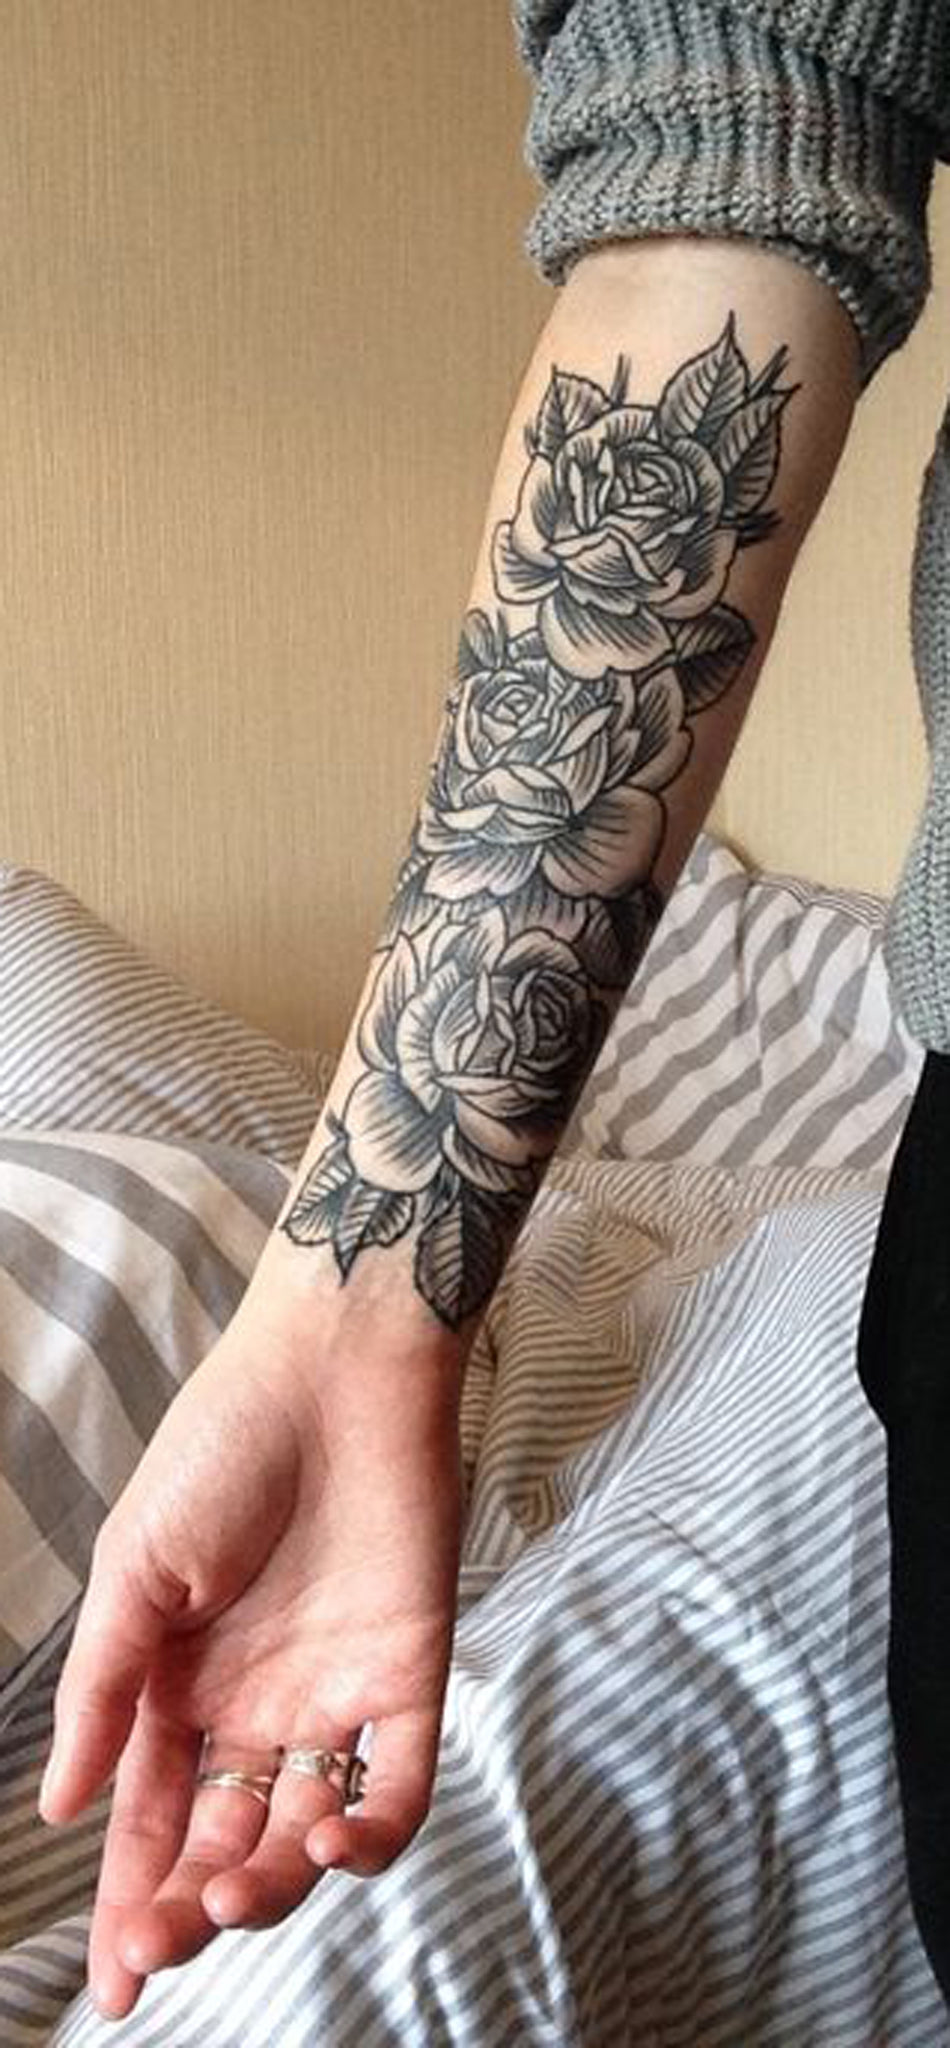 10 Awesome Forearm Tattoos - The Lads Room